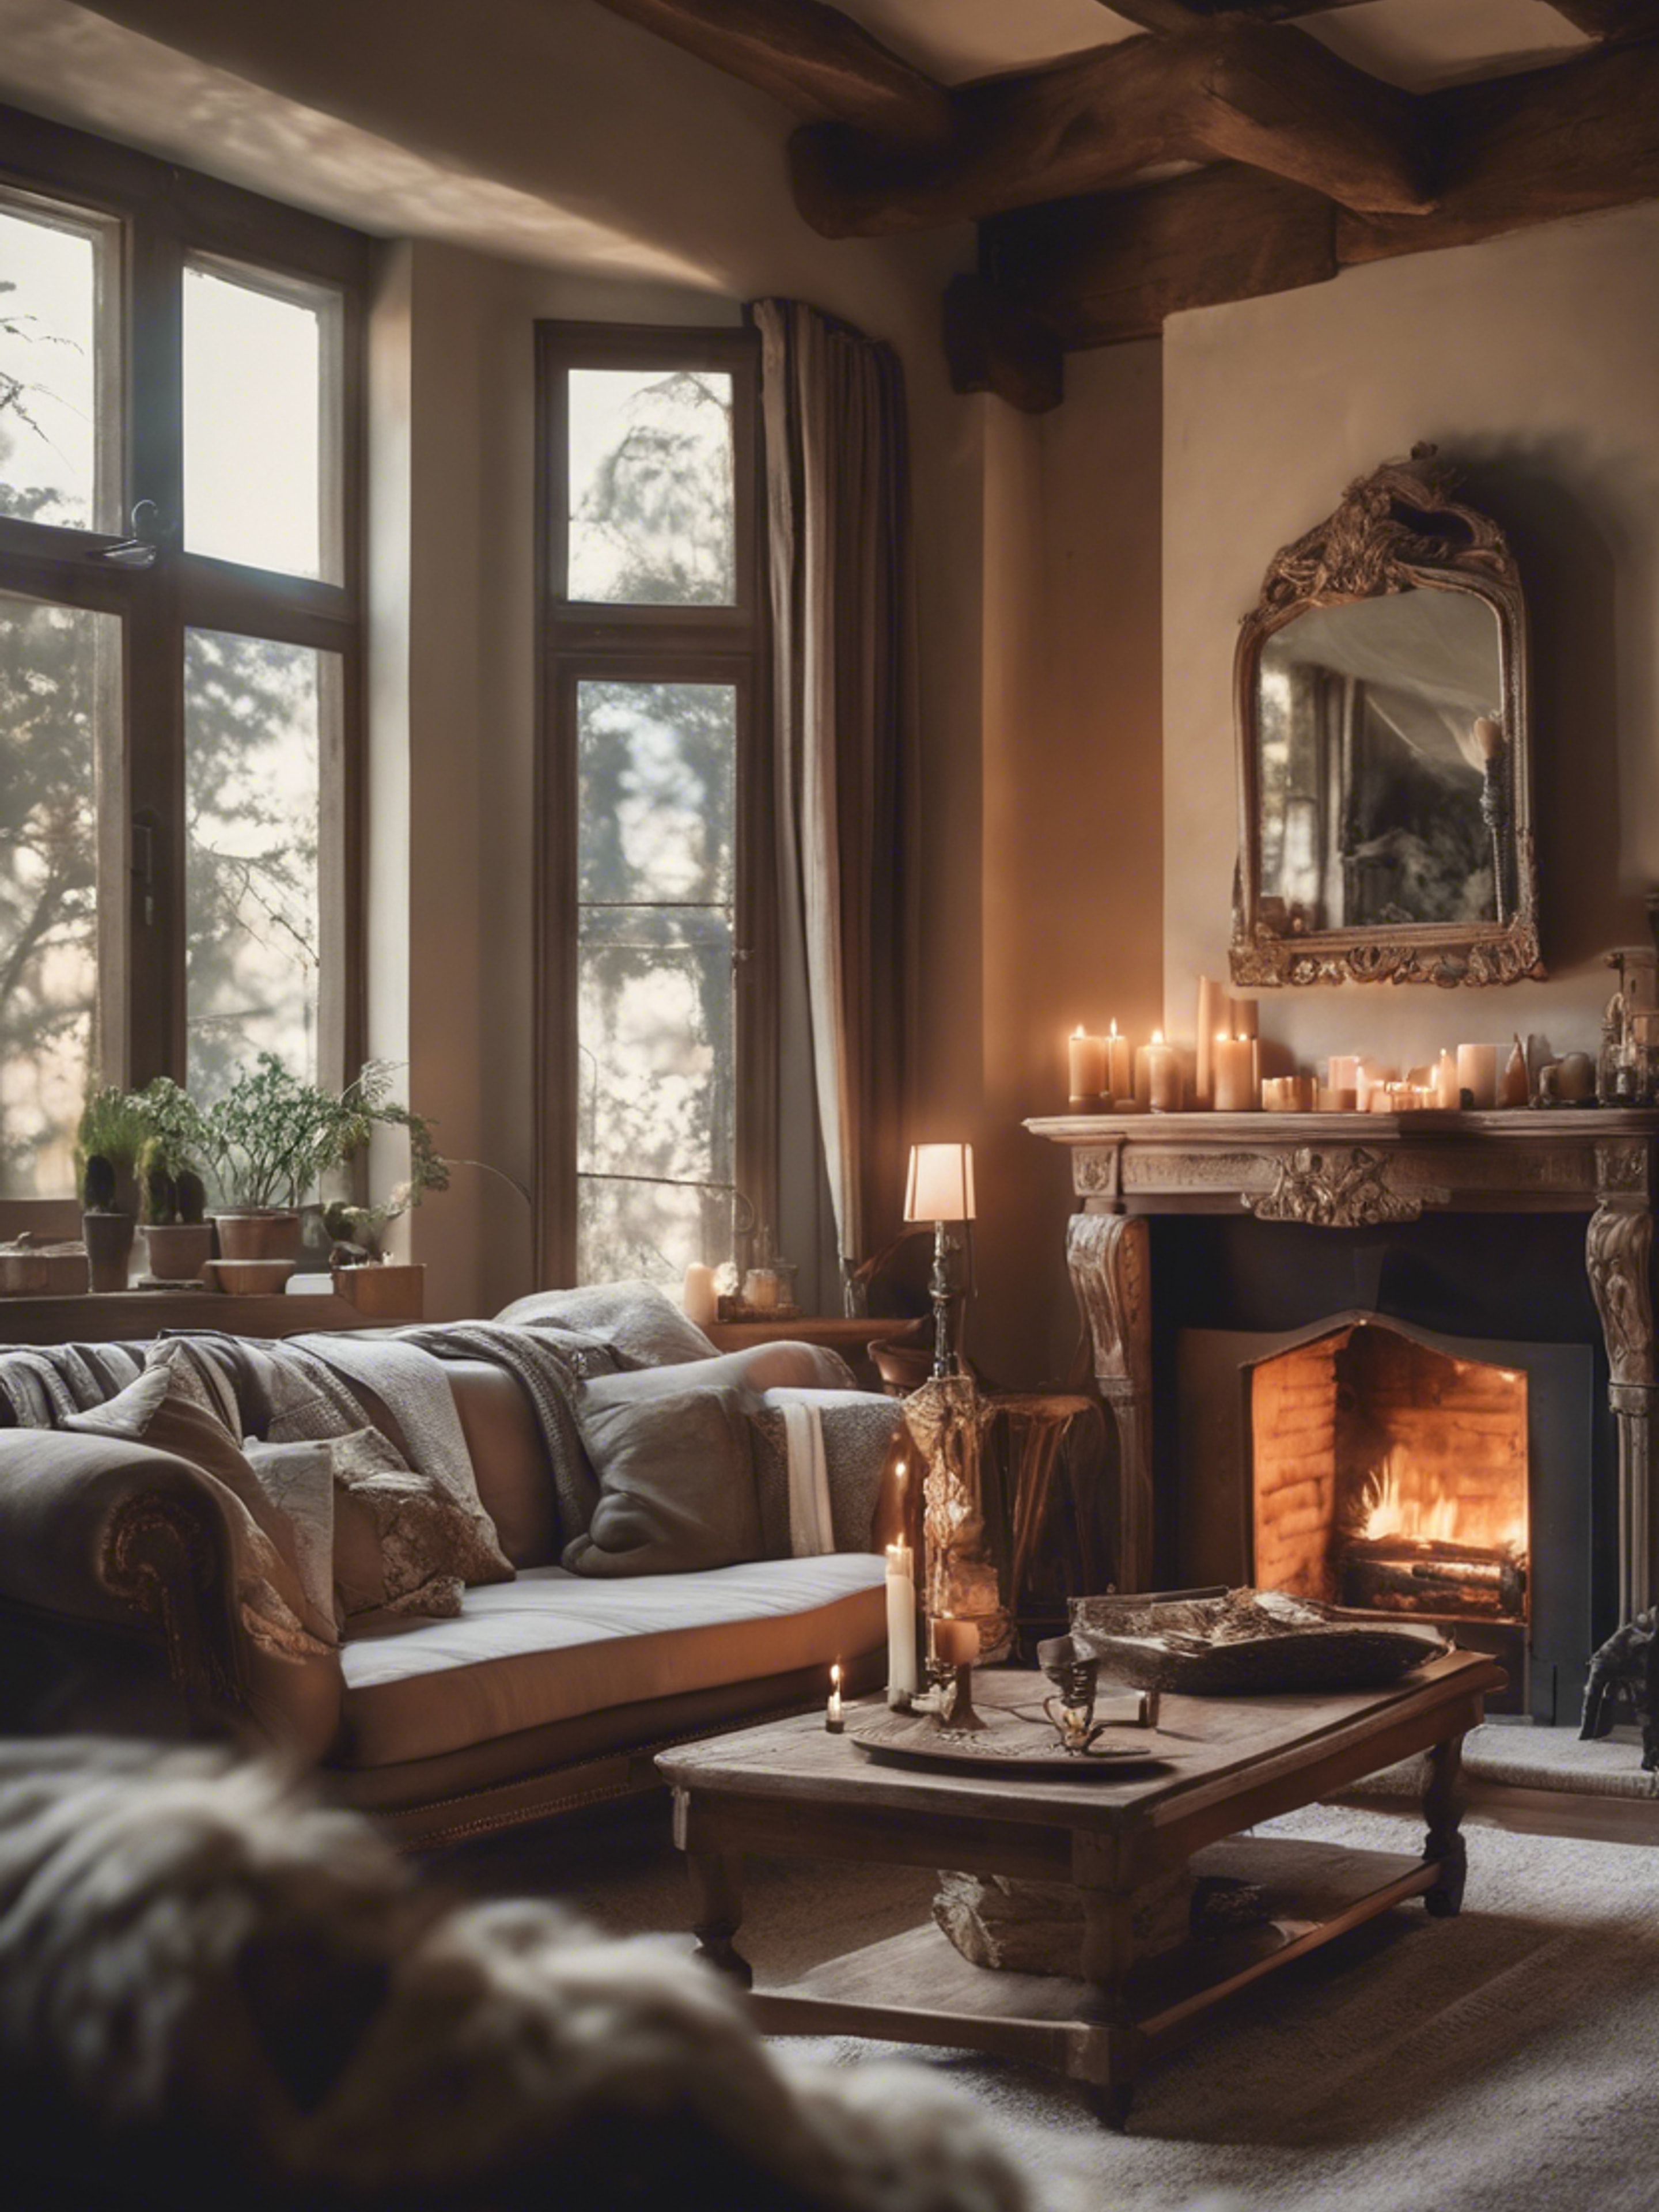 A French country style living room, cozy and comfortable with a roaring fireplace, antique furniture, and soft candlelight. 墙纸[b1f658778f85425ba676]